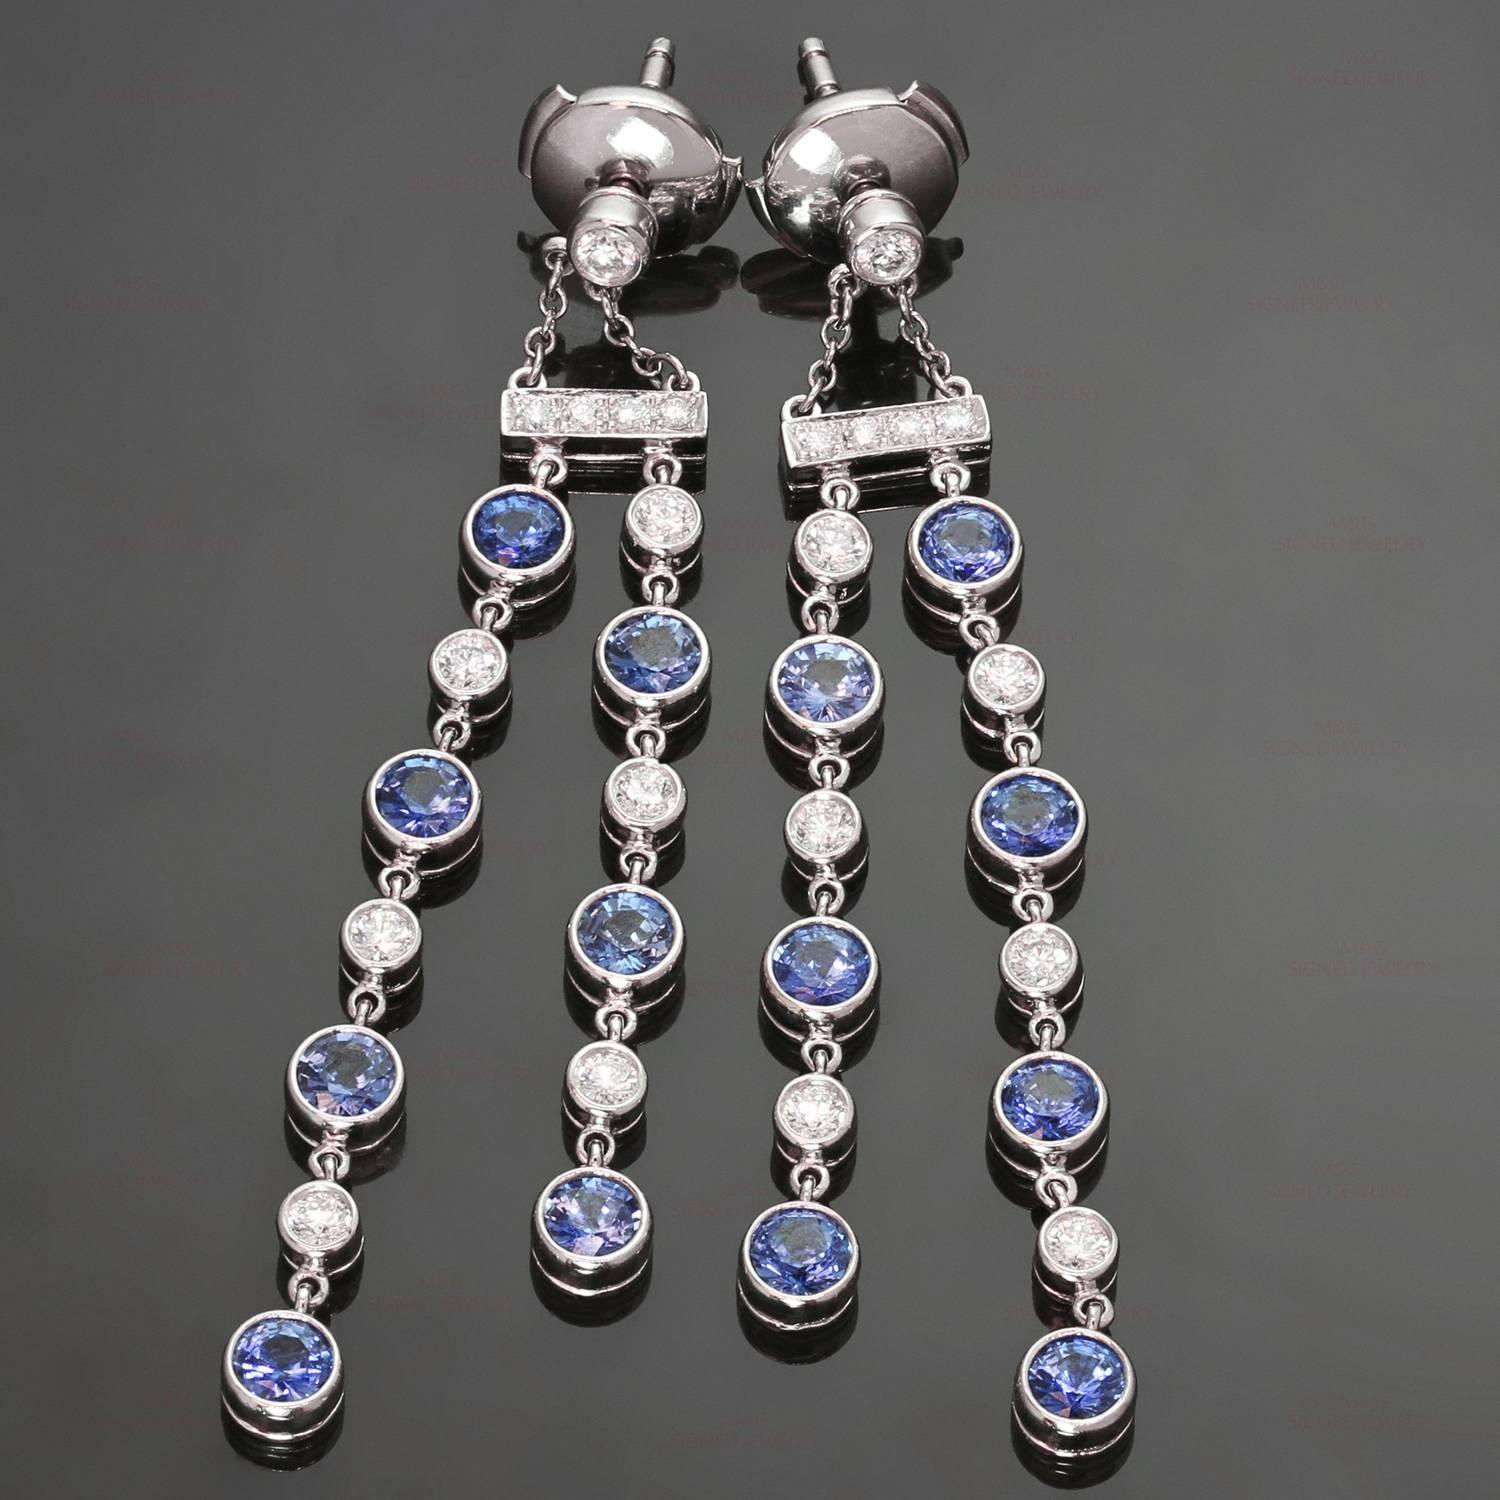 These fabulous earrings from Tiffany's Jazz collection feature a double-drop design crafted in fine platinum and set with brilliant-cut round diamonds of an estimated 0.80 carats and intense blue sparkling round sapphire. Made in United States circa